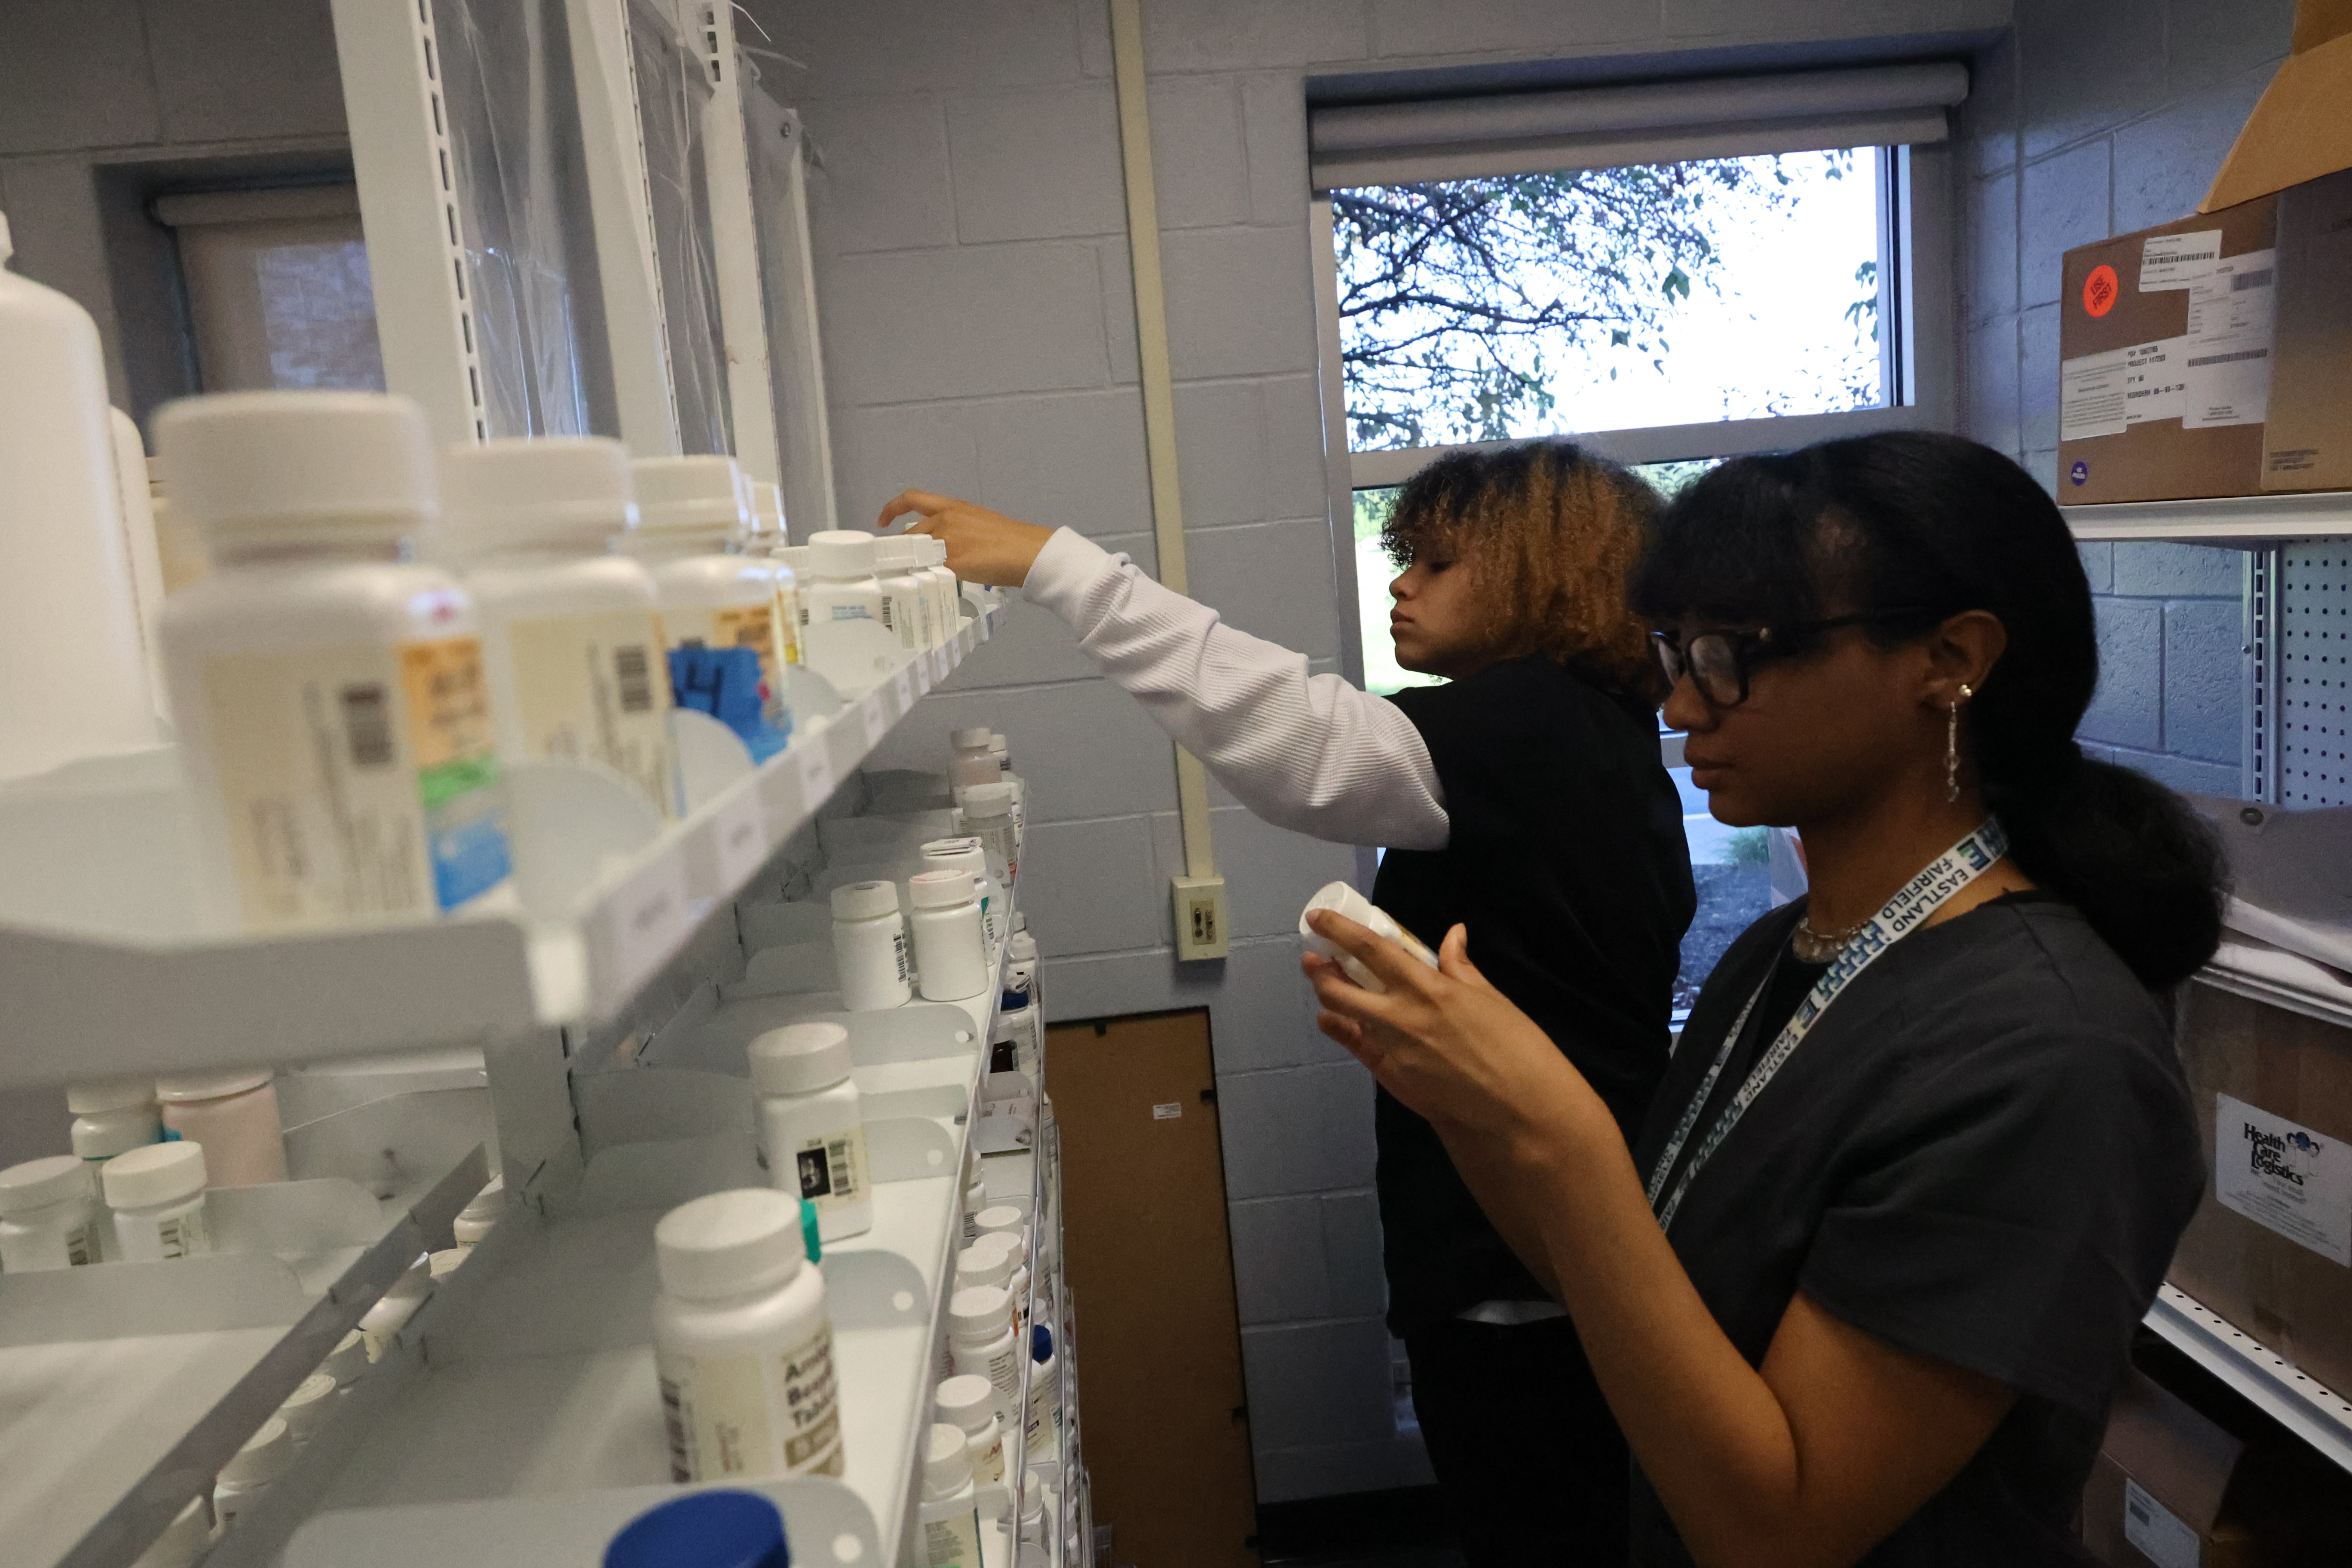 Two students are examining and sorting placebo medication on the shelves of the lab pharmacy